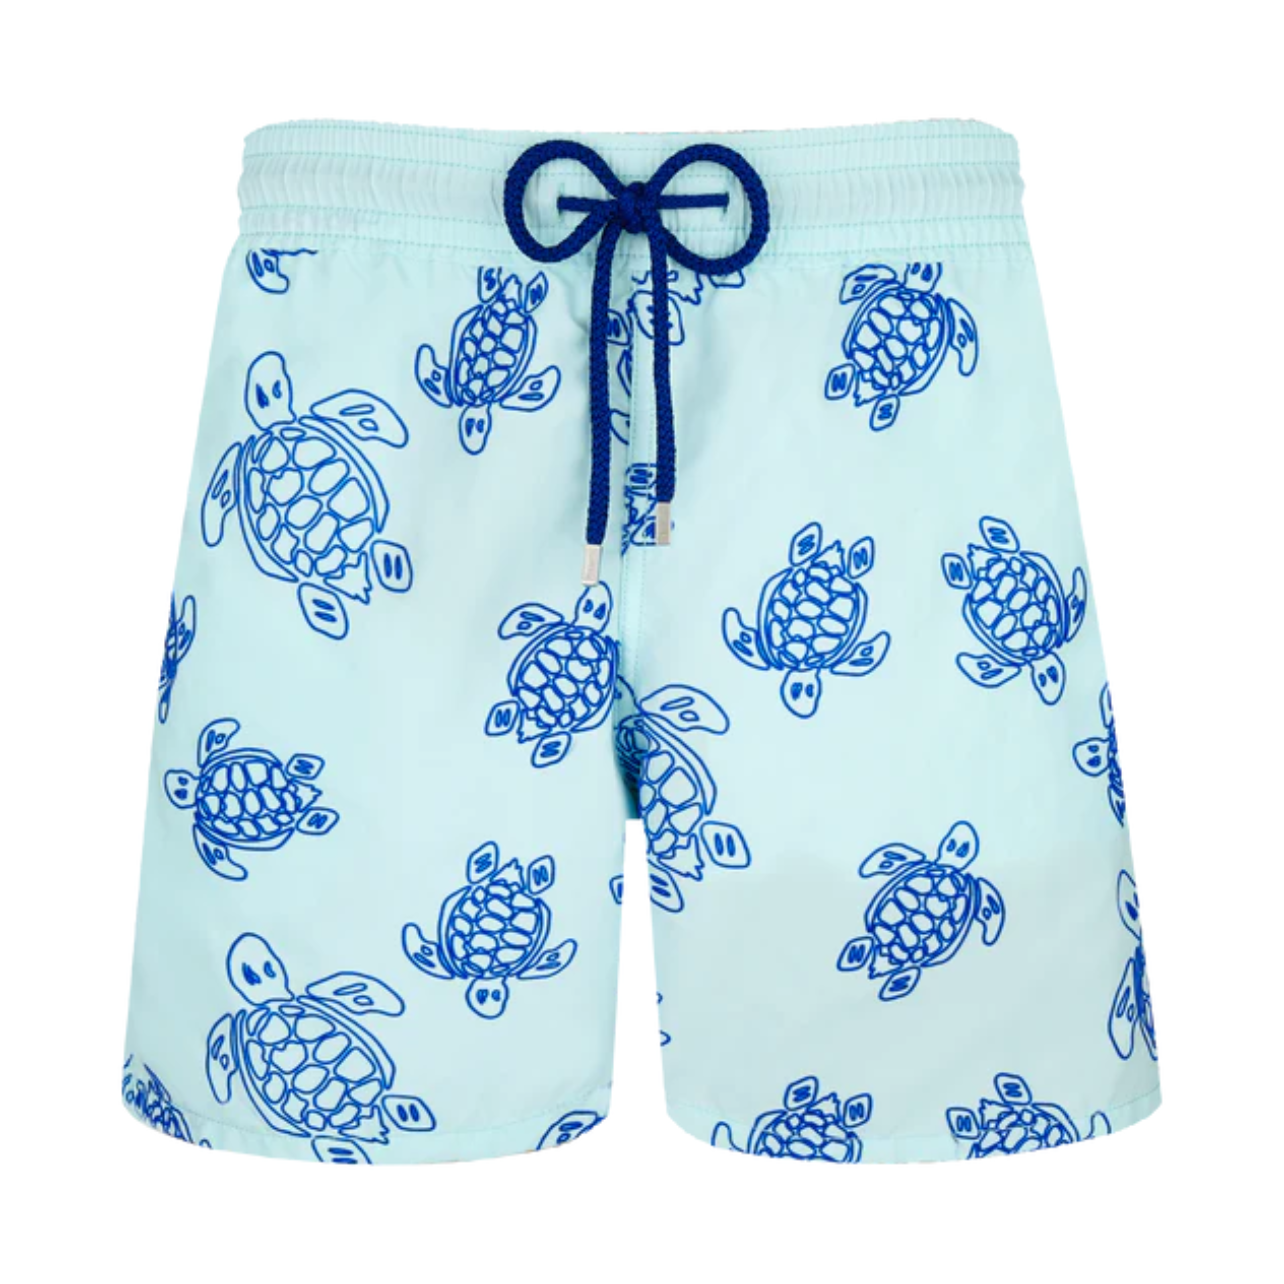 Vilebrequin mens swim trunks in blue with white turtle illustrations